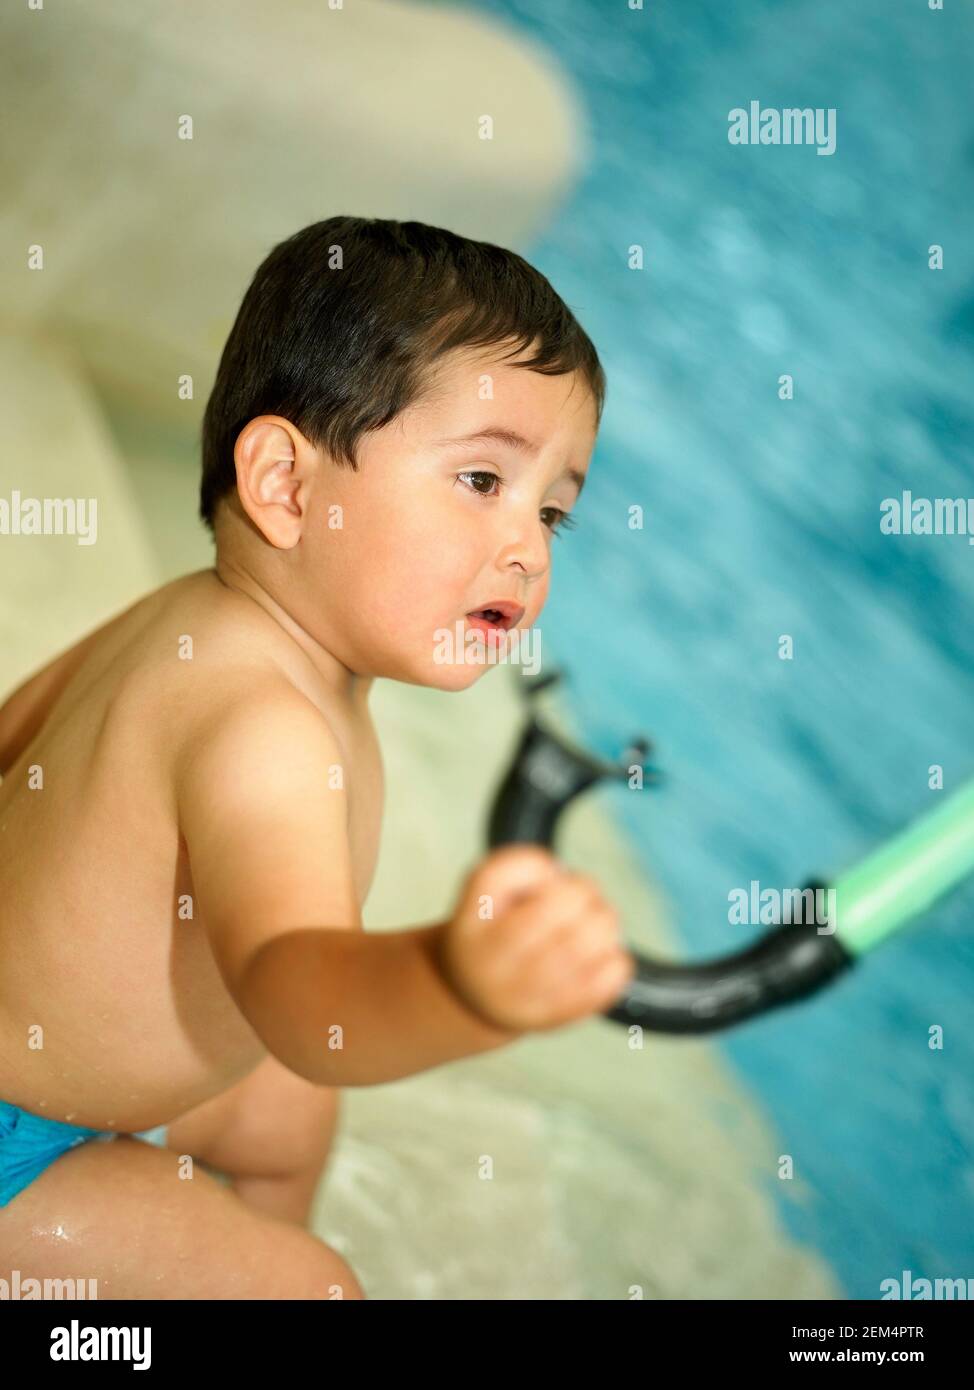 Side profile of a baby boy holding a snorkel and sitting near a swimming pool Stock Photo